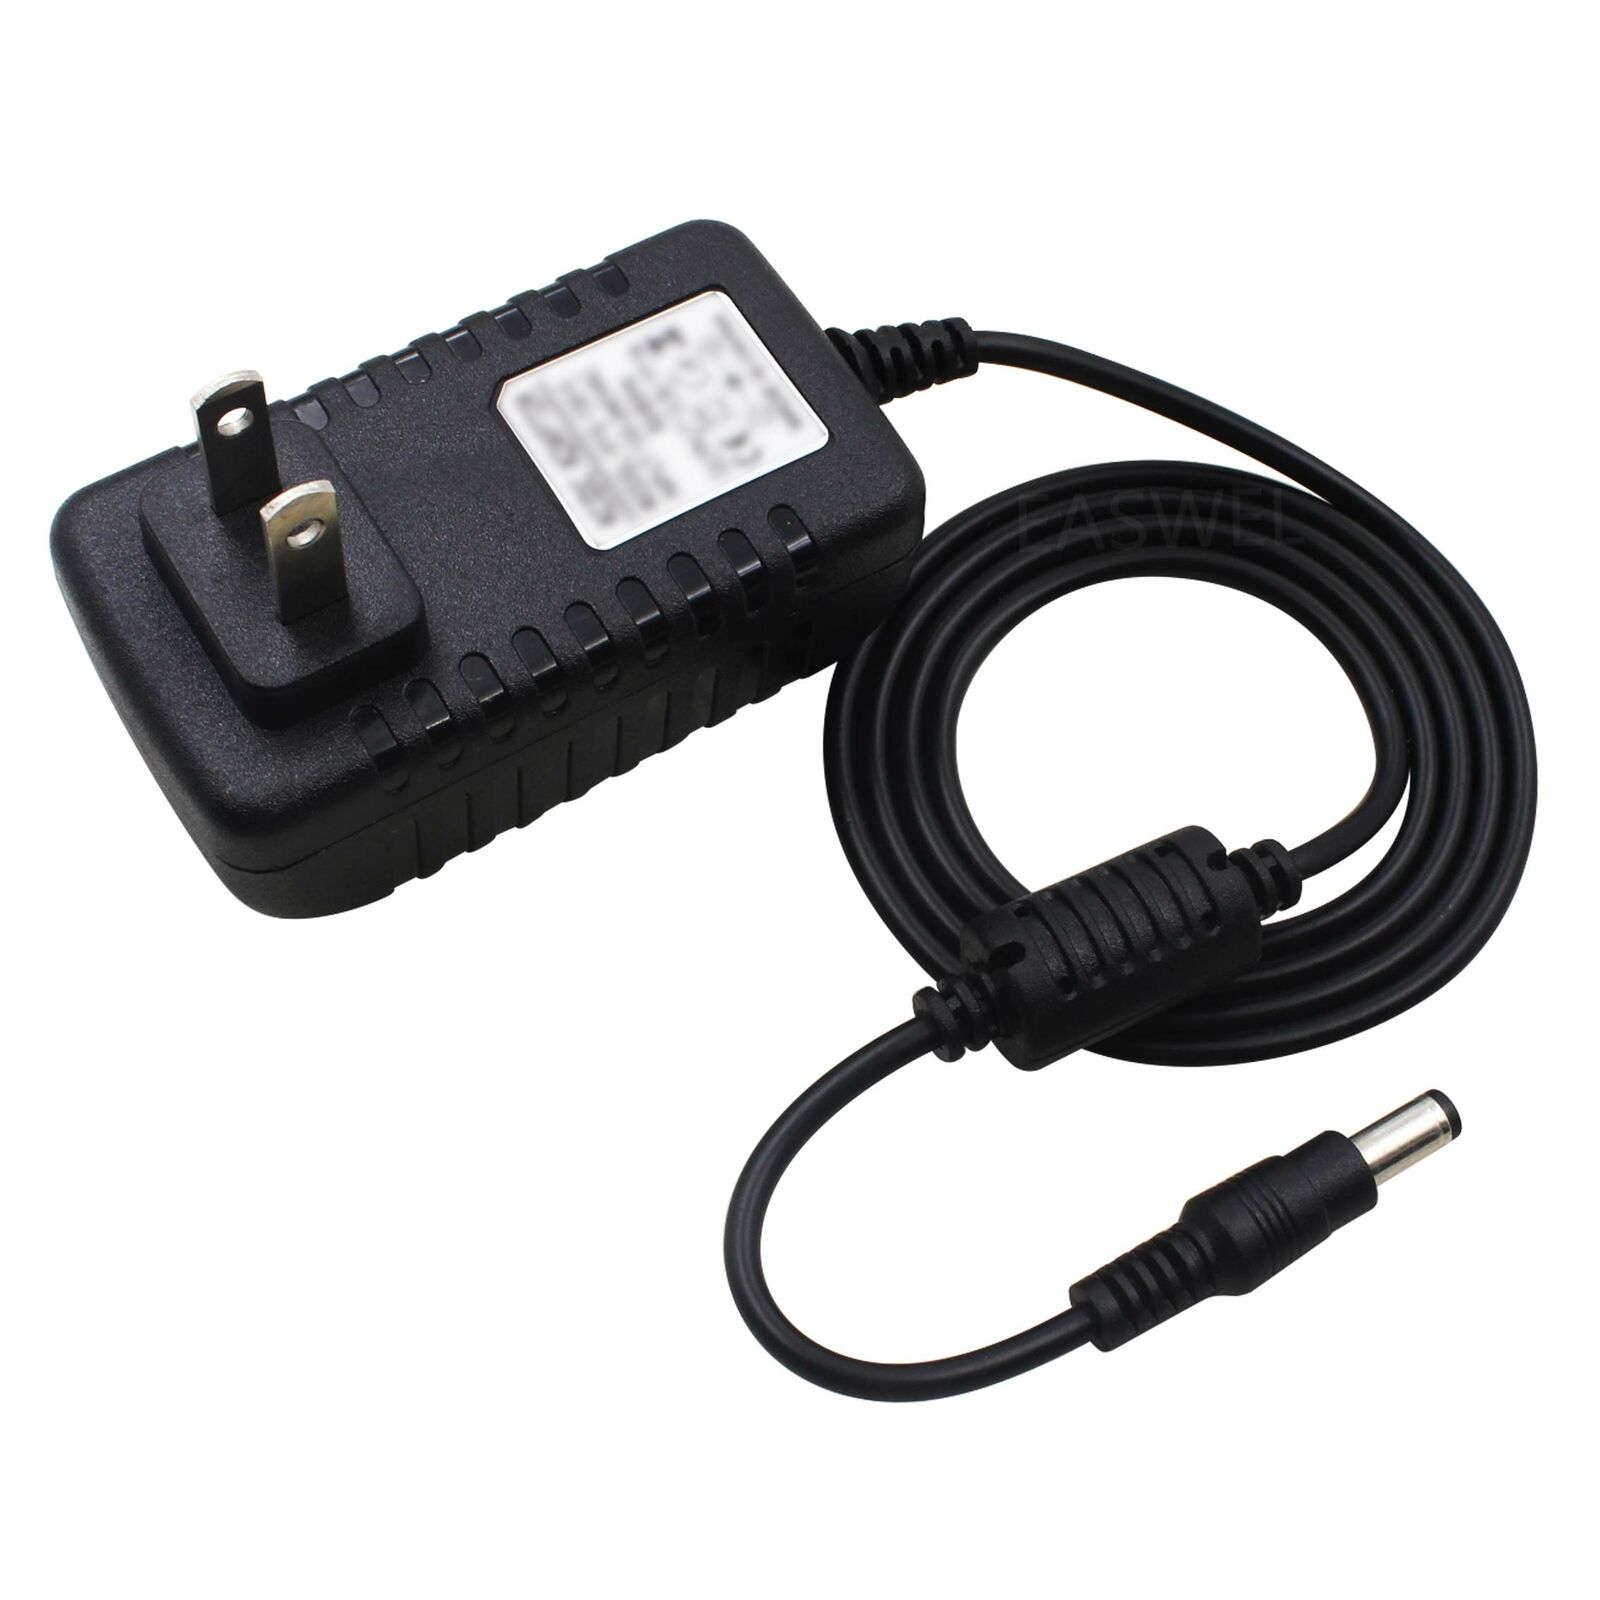 13.5V 1A AC/DC Adapter For On Board Vector 450Amp Jump Start System VEC012APM